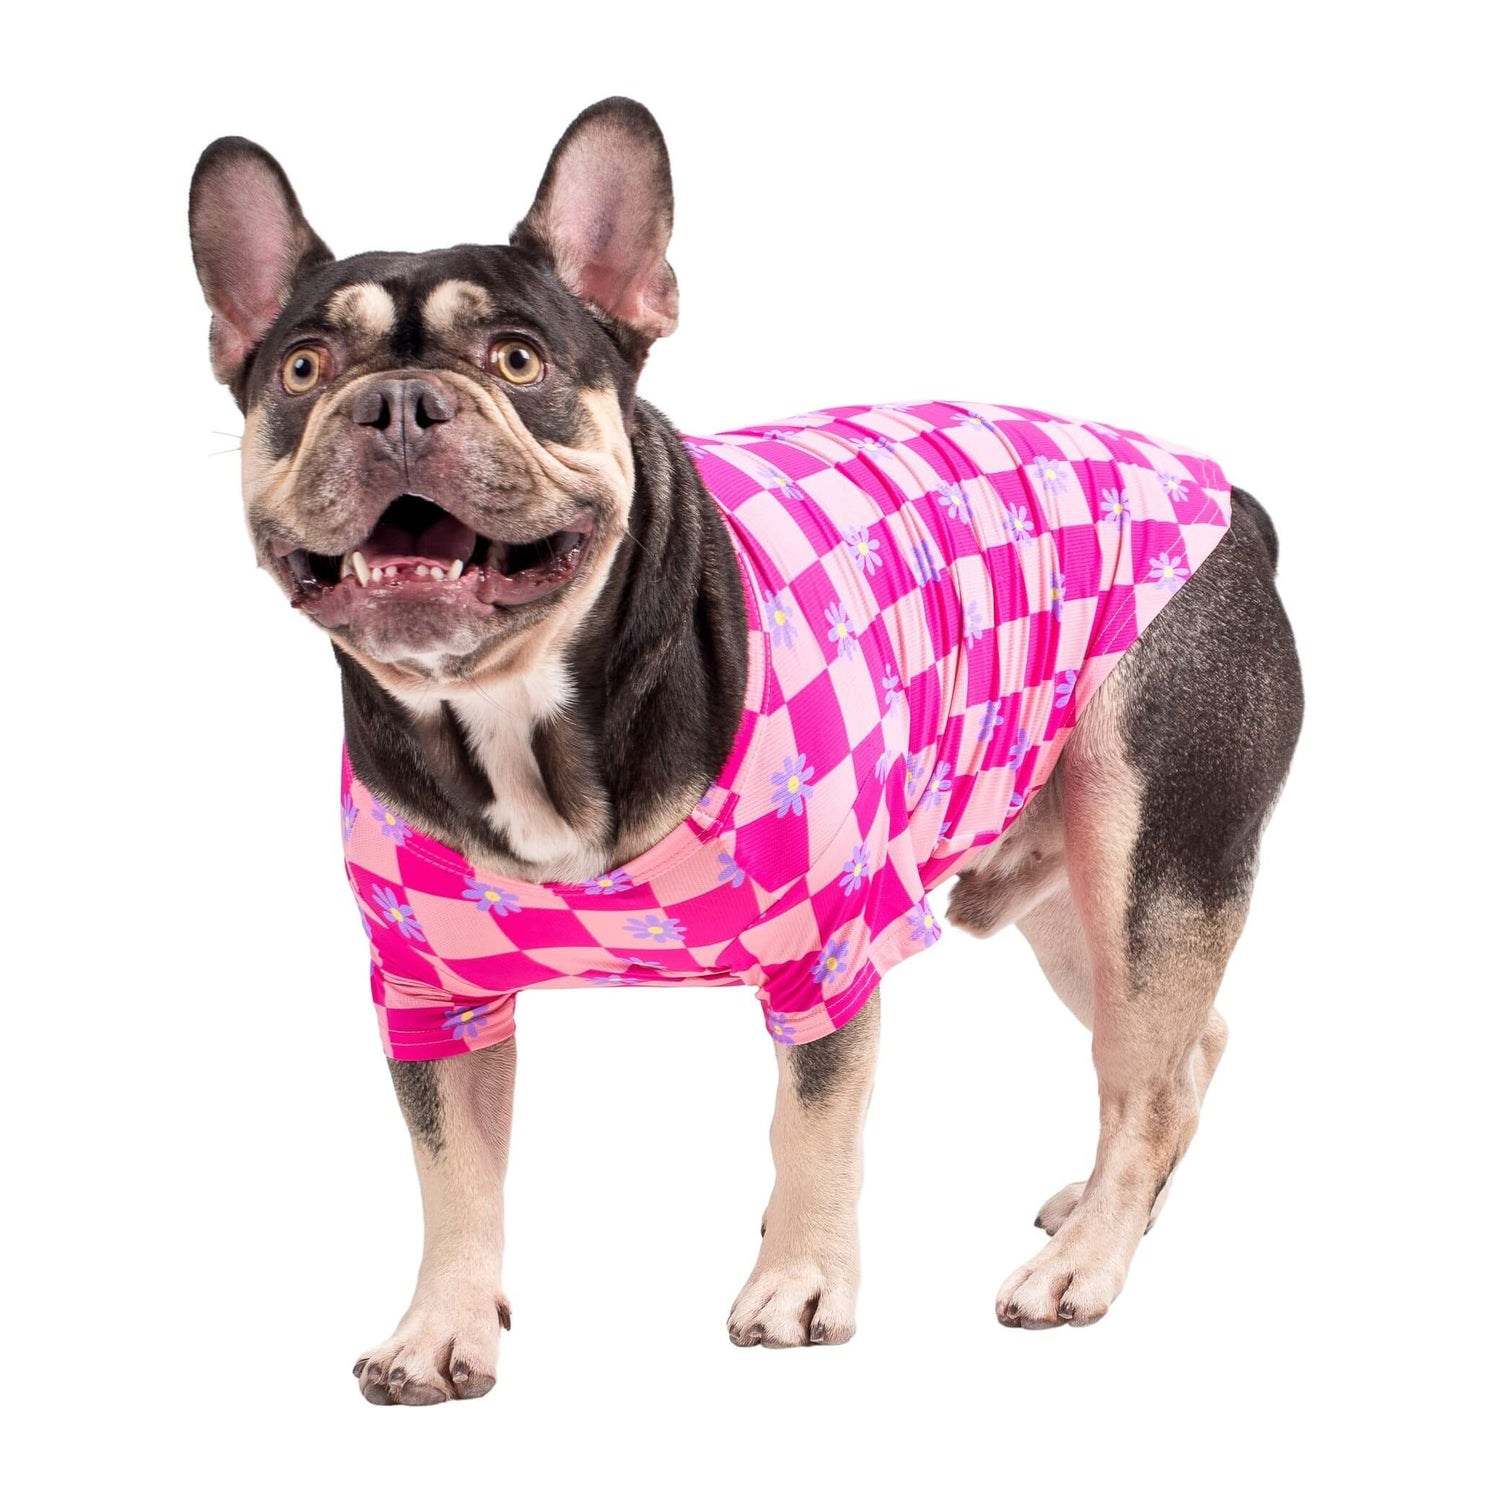 French bulldog wearing Vibrant Hounds Crazy Daisy cooling shirt for dogs. It is pink chequered with daisys printed on it.